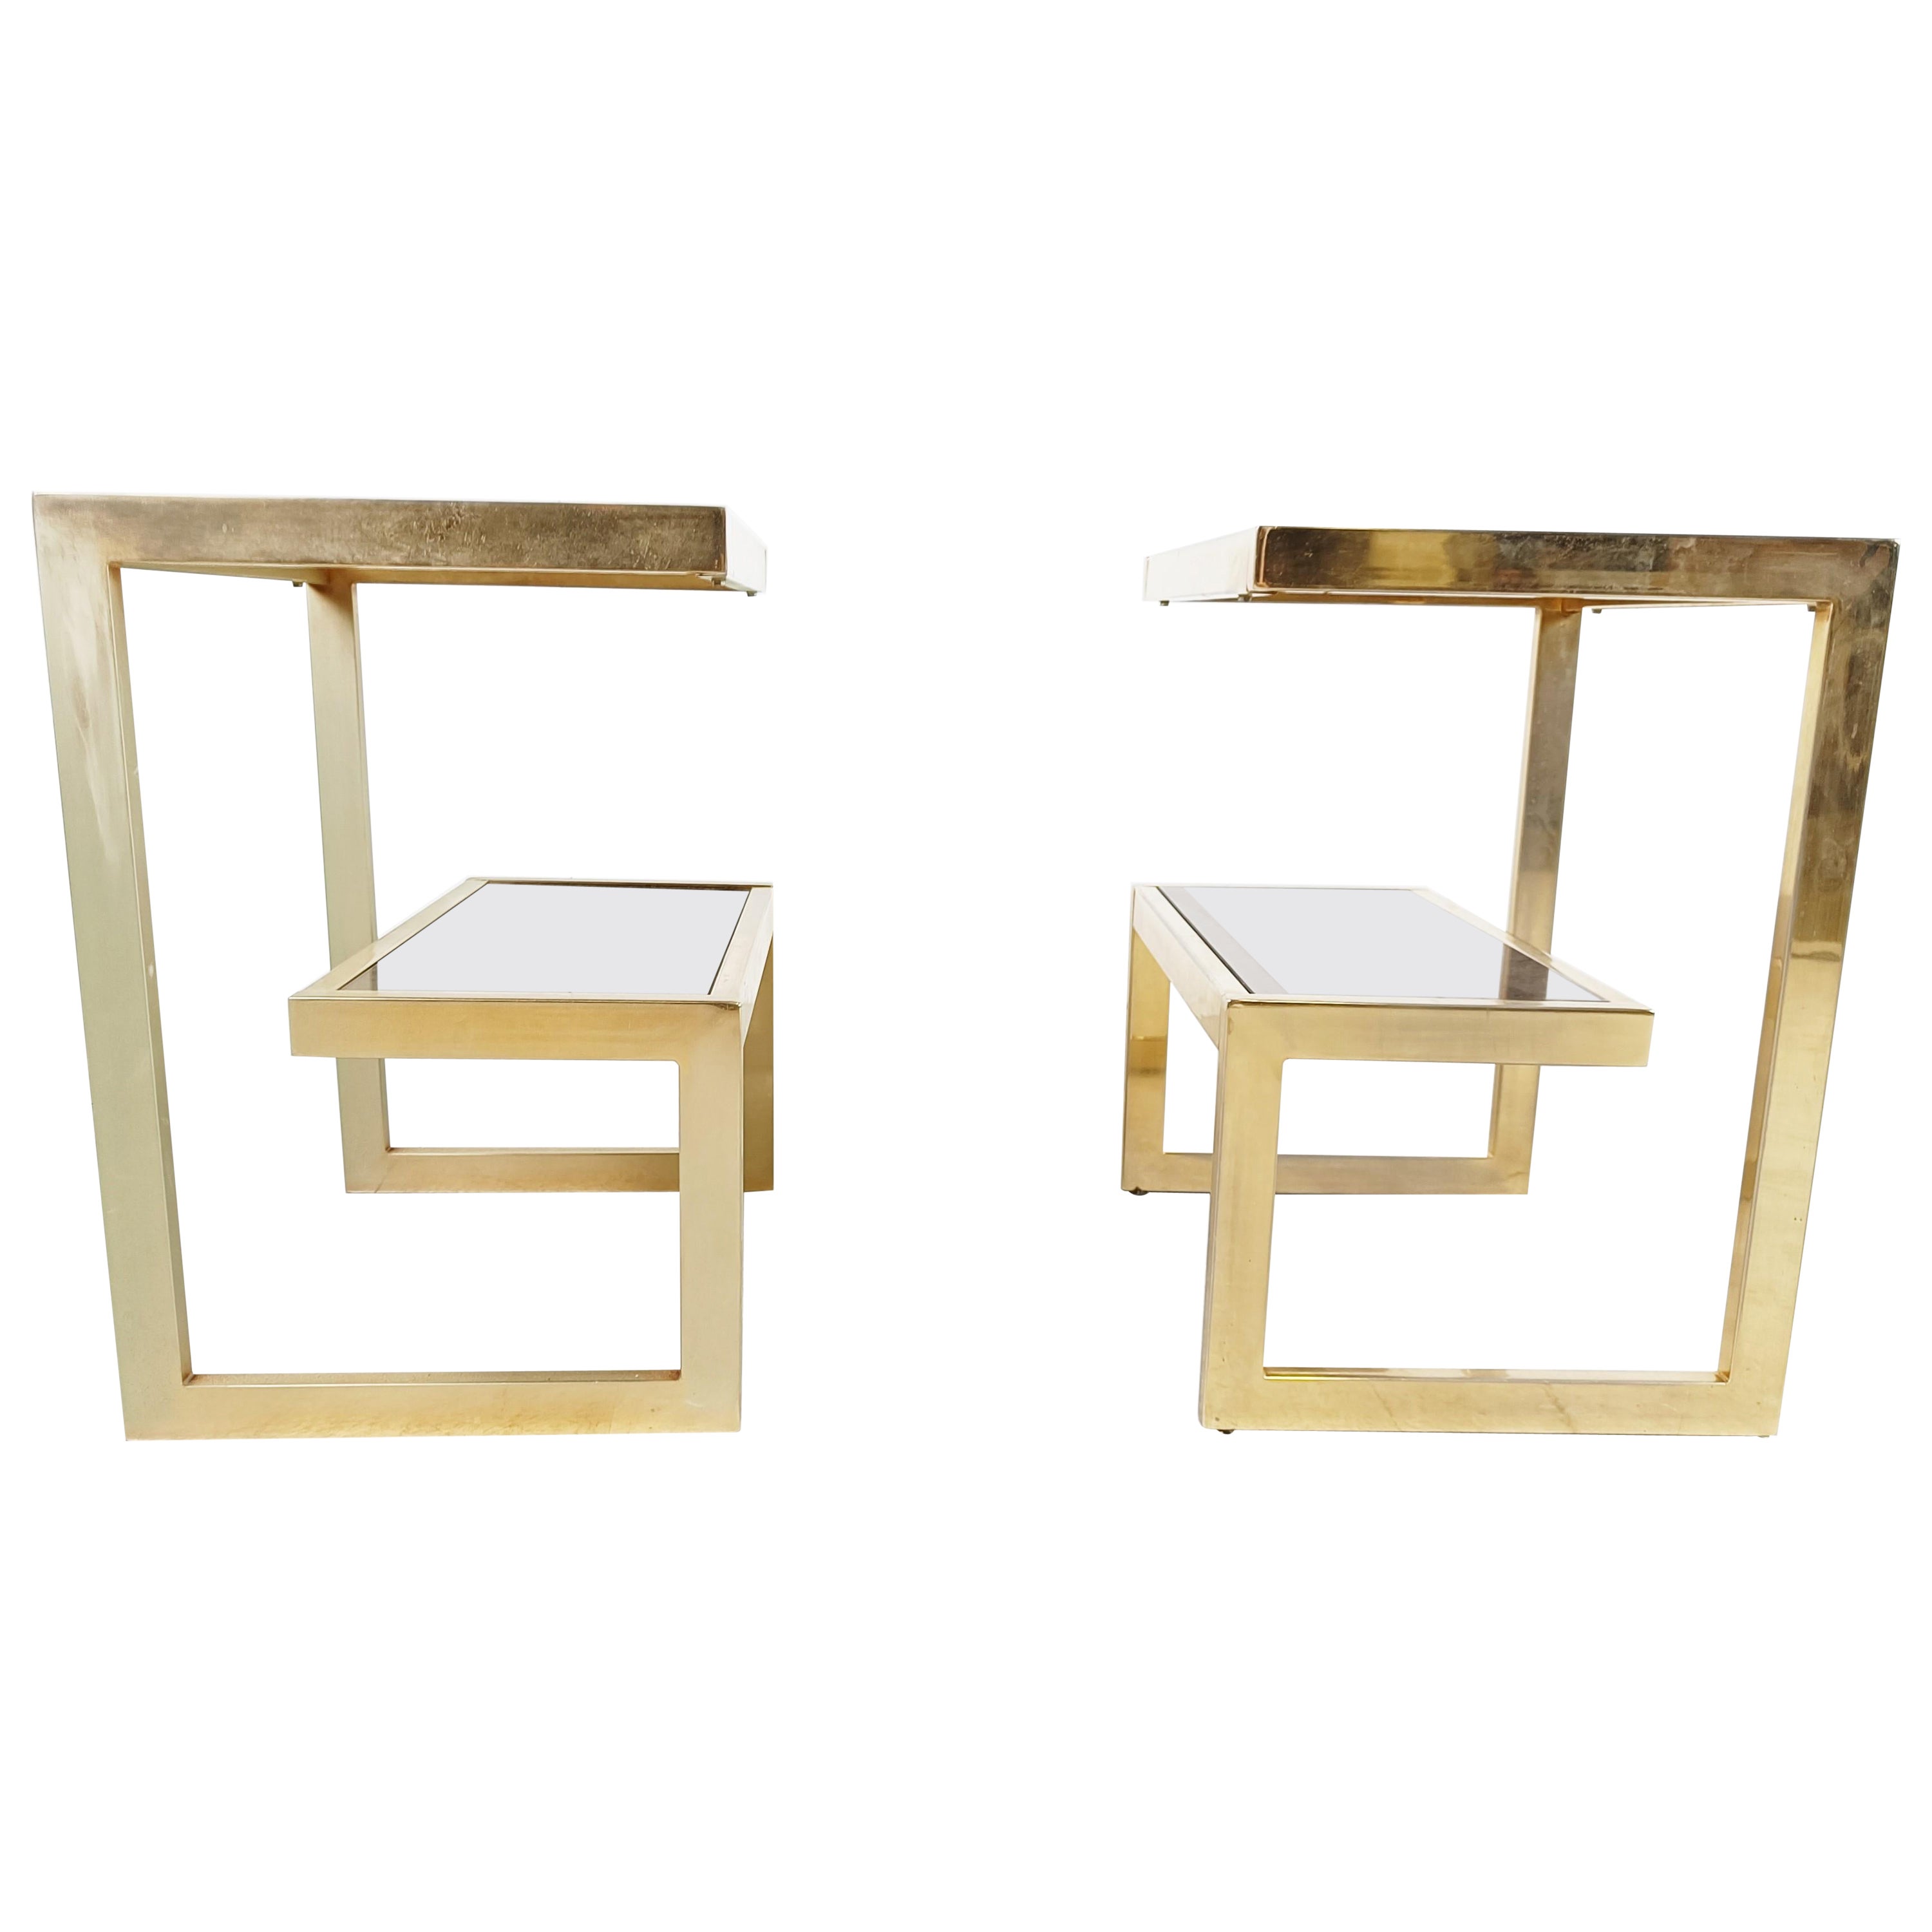 Golden G side tables by Belgochrom, set of two, 1970s